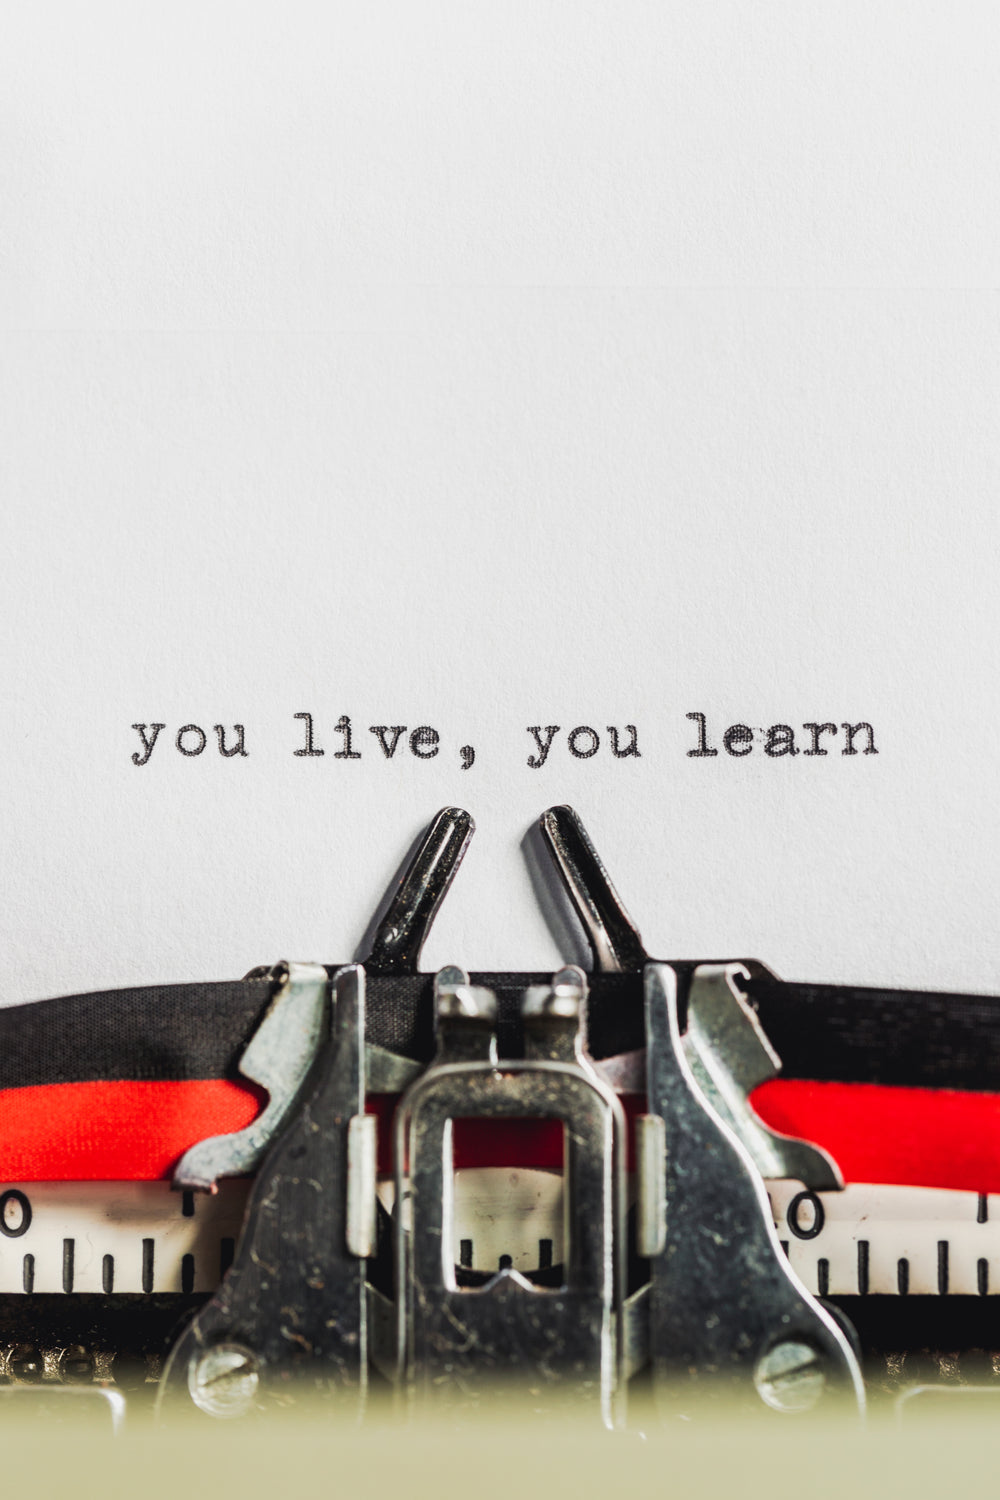 text on typewriter states you live, you learn